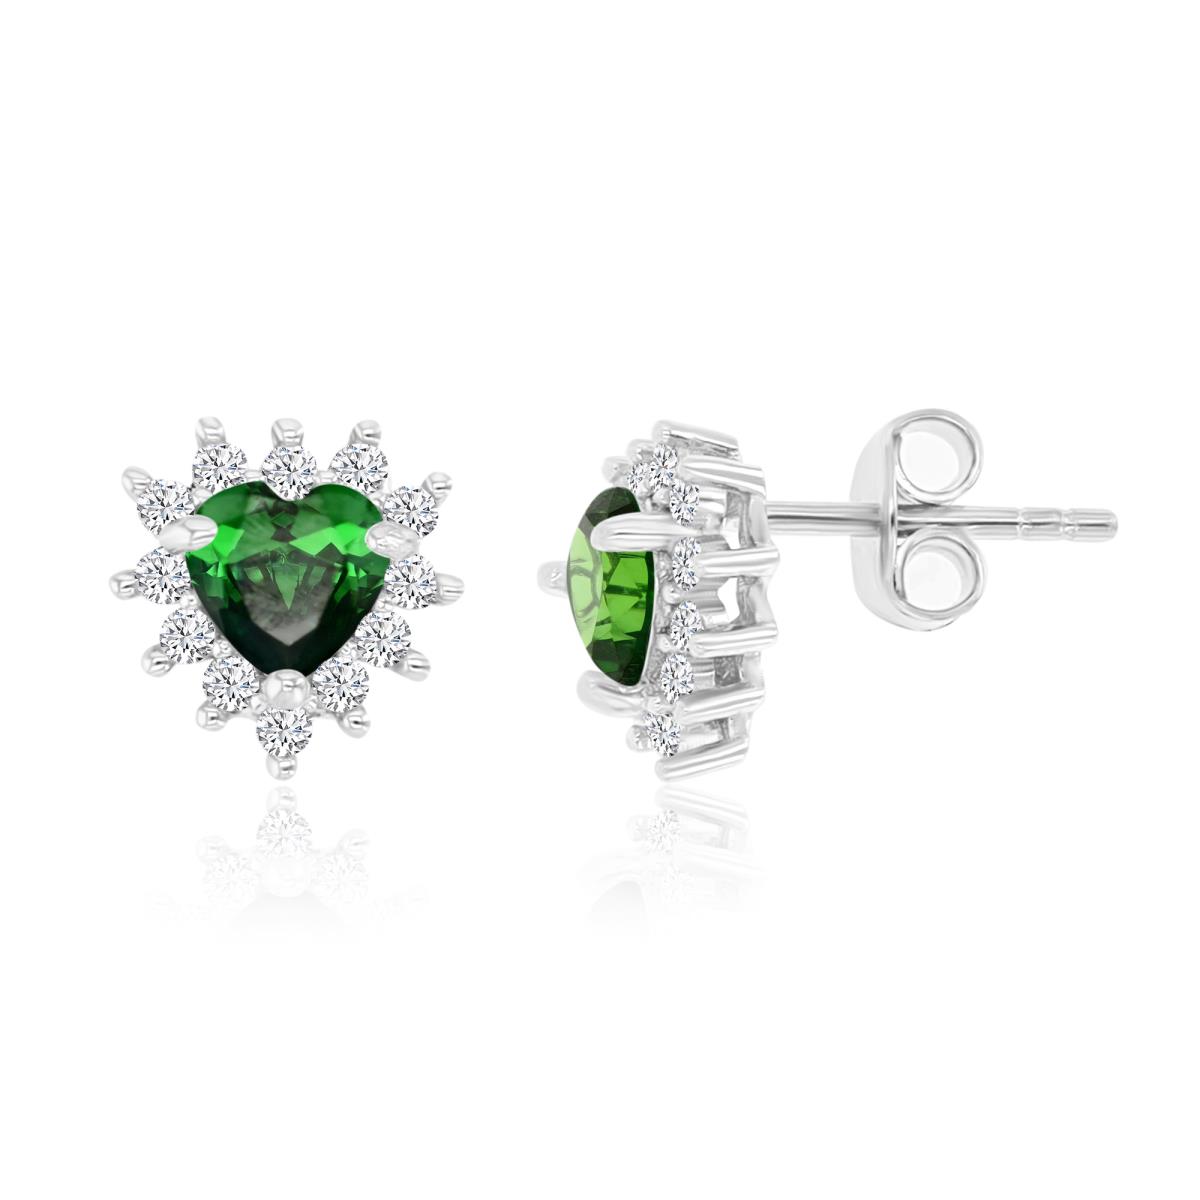 Sterling Silver Rhodium 9MM Polished Green & White CZ Heart Stud Earrings